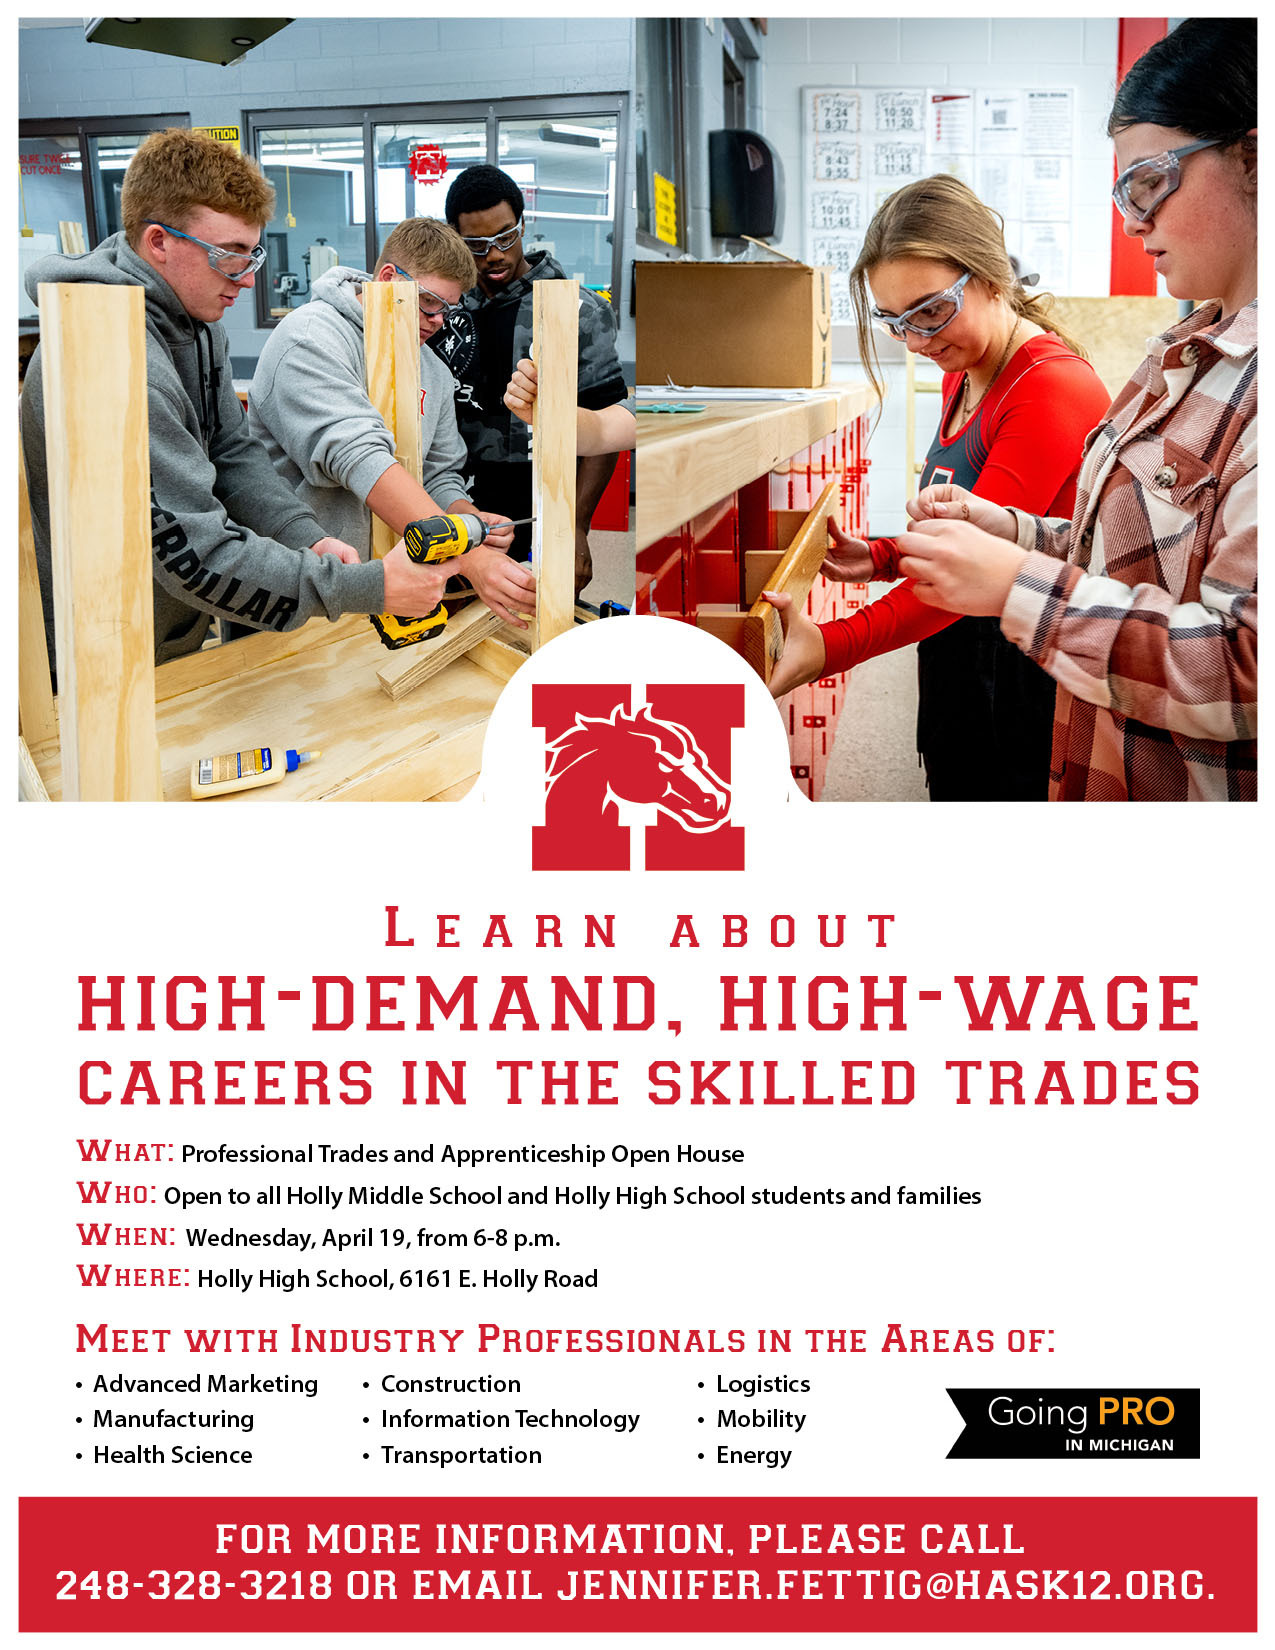 2023 Professional Trades and Apprenticeship Open House Flyer Image